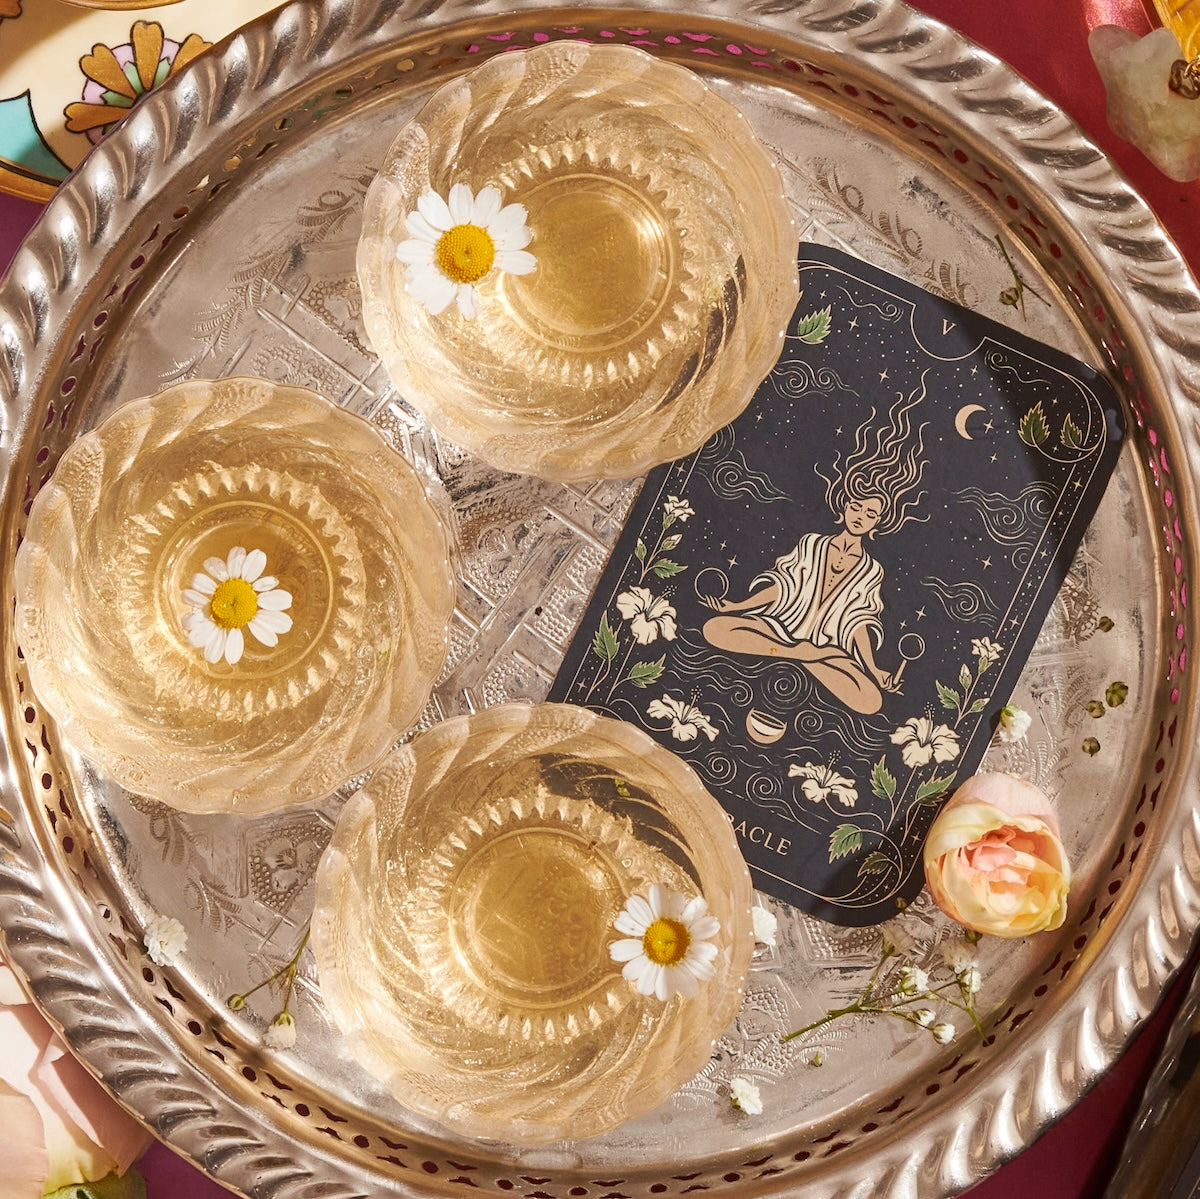 A decorative tray holds three round-shaped gel desserts with chamomile flowers on top. Beside them is an illustrated tarot card depicting a meditative figure amidst swirling lines, plants, and celestial elements. A small flower lies at the edge of the tray, hinting at a tranquil tarot journey enhanced by Magic Hour's Monthly Magic 3-Month Tea Subscription Box.